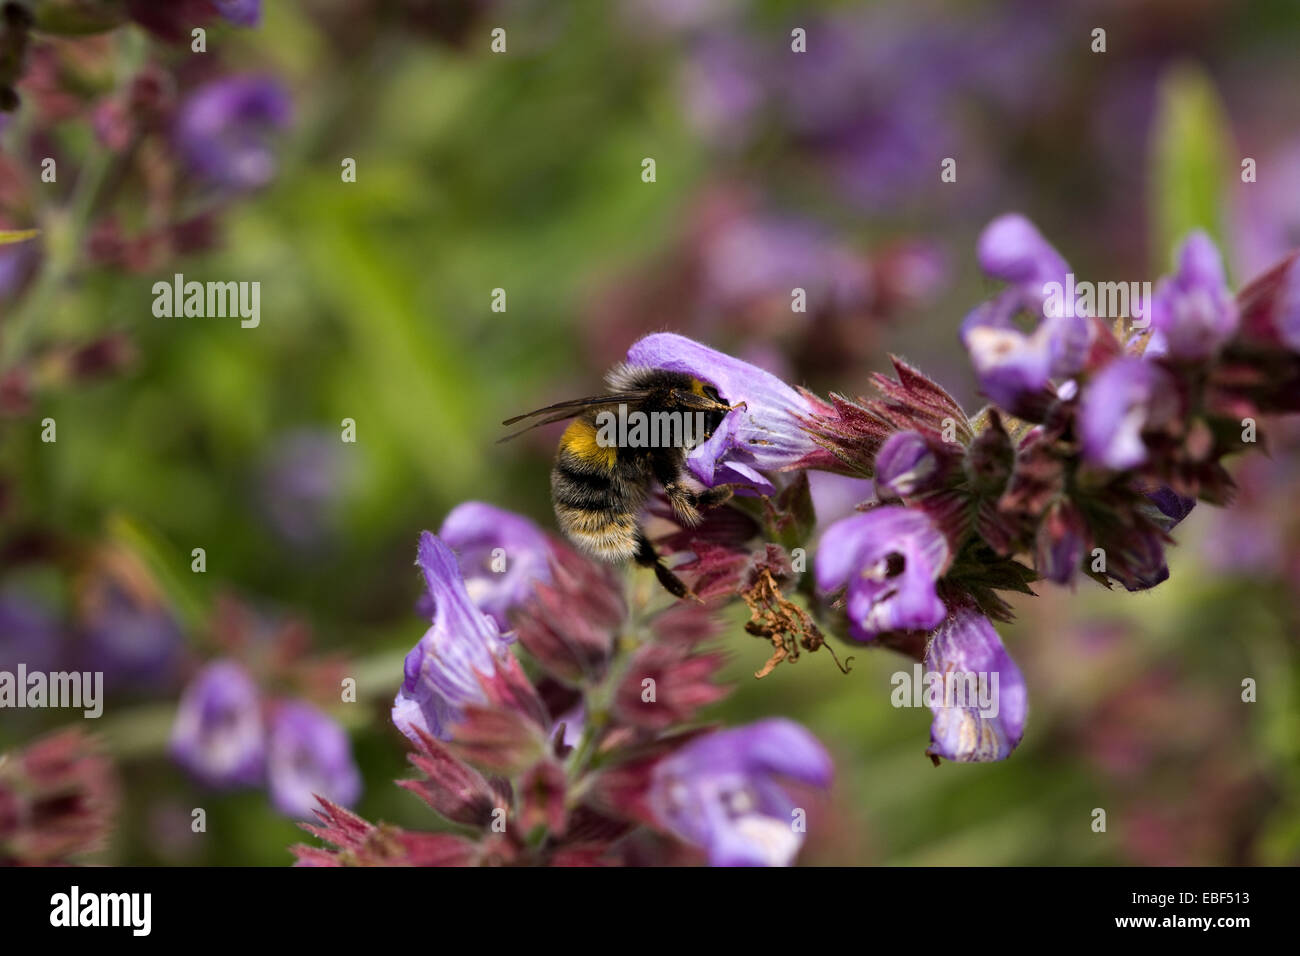 Bumble Bee pollinating Sage flower Stock Photo - Alamy